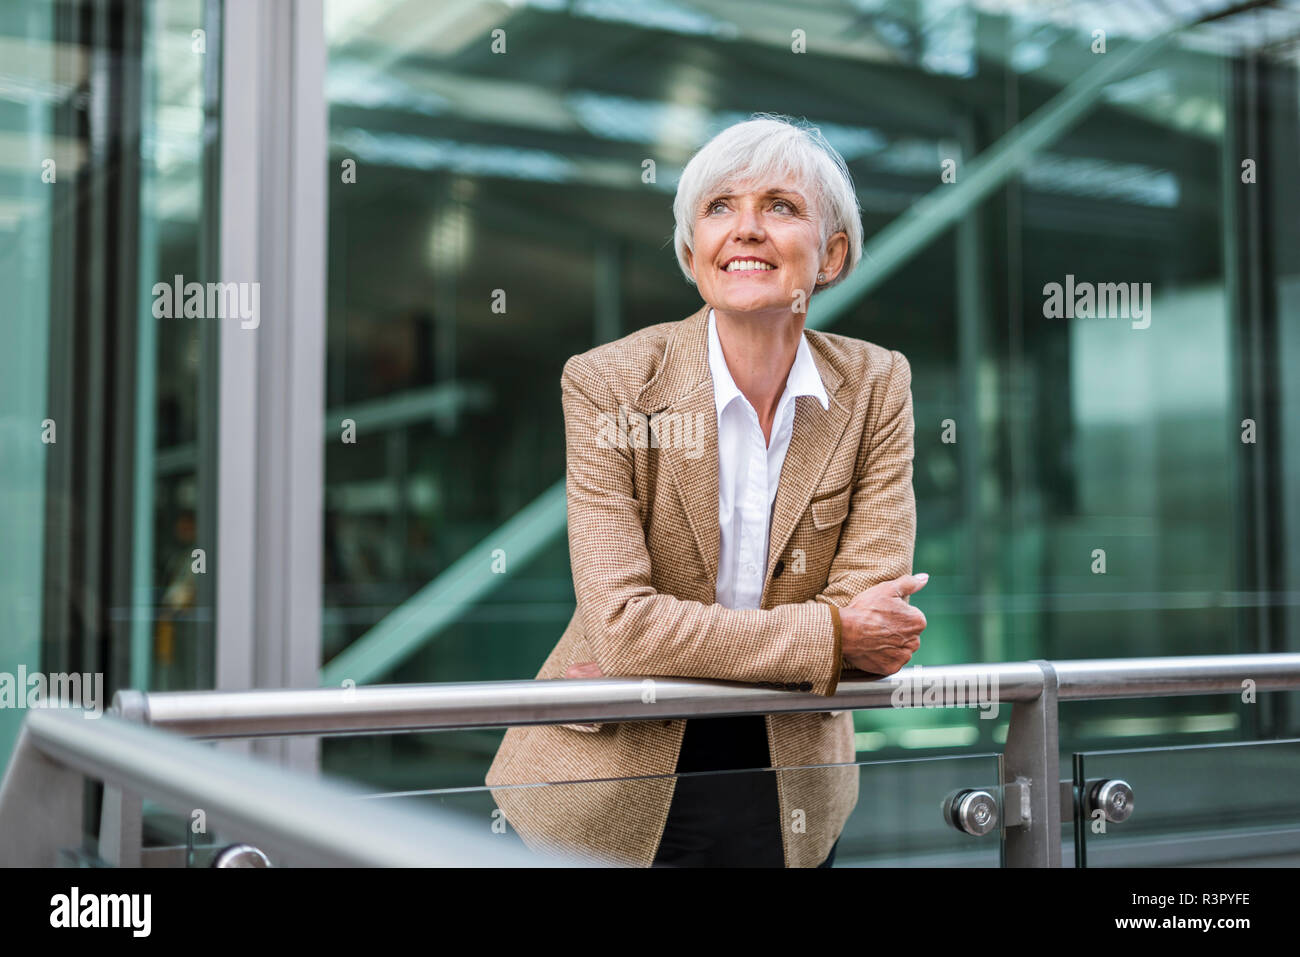 Portrait of smiling senior businesswoman leaning on railing in the city looking up Stock Photo